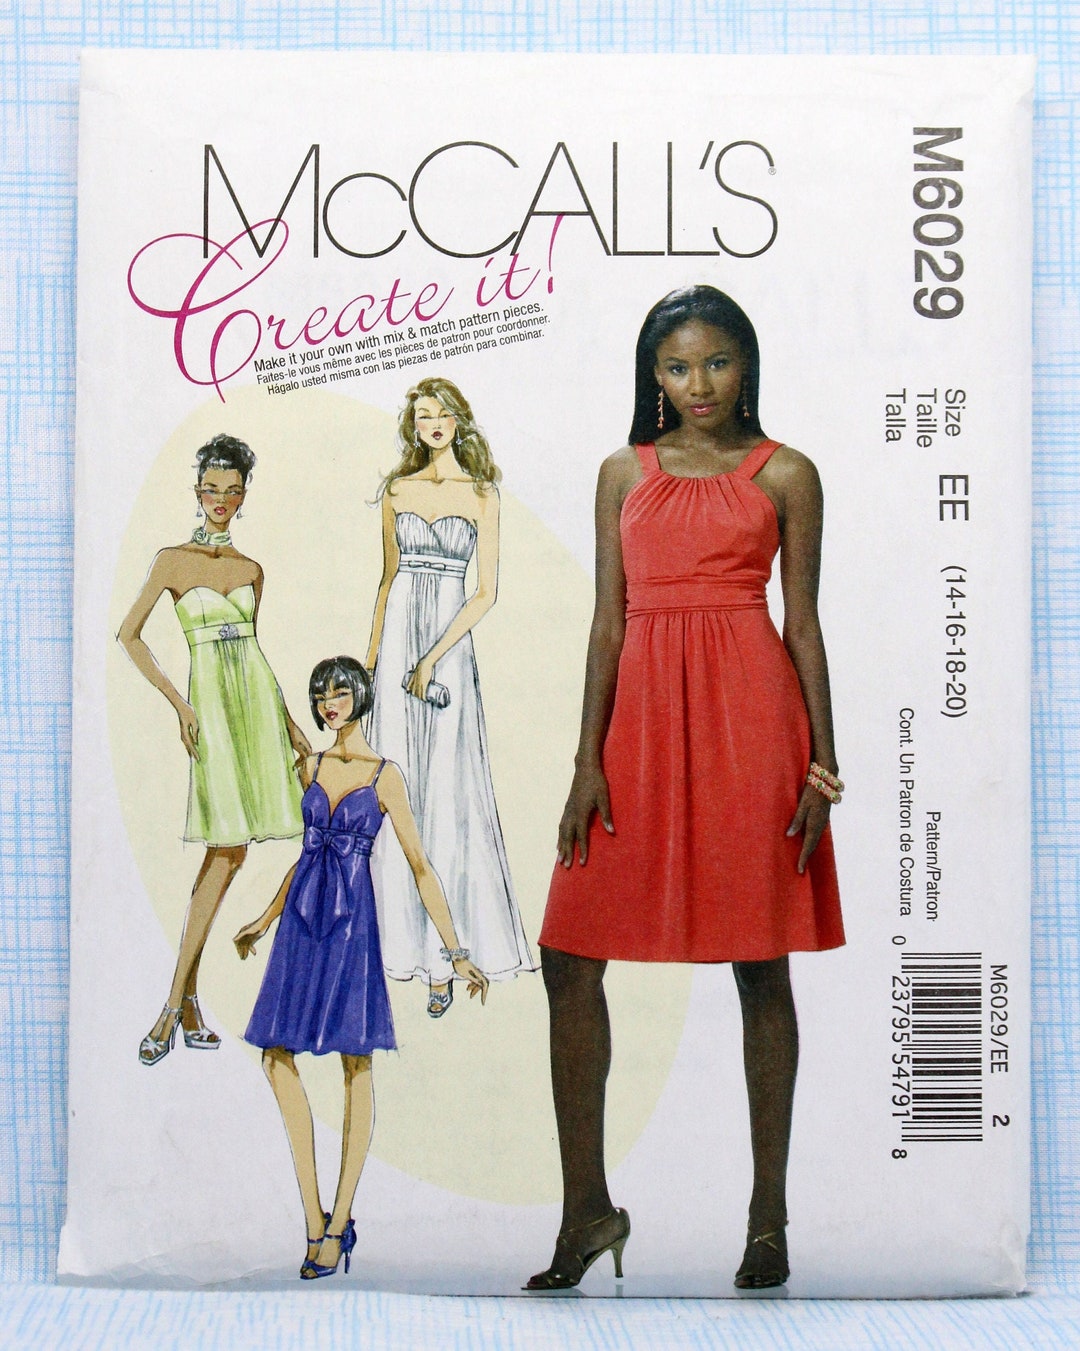 Mccall's Sewing Pattern 6029 Misses' Raised Waist - Etsy